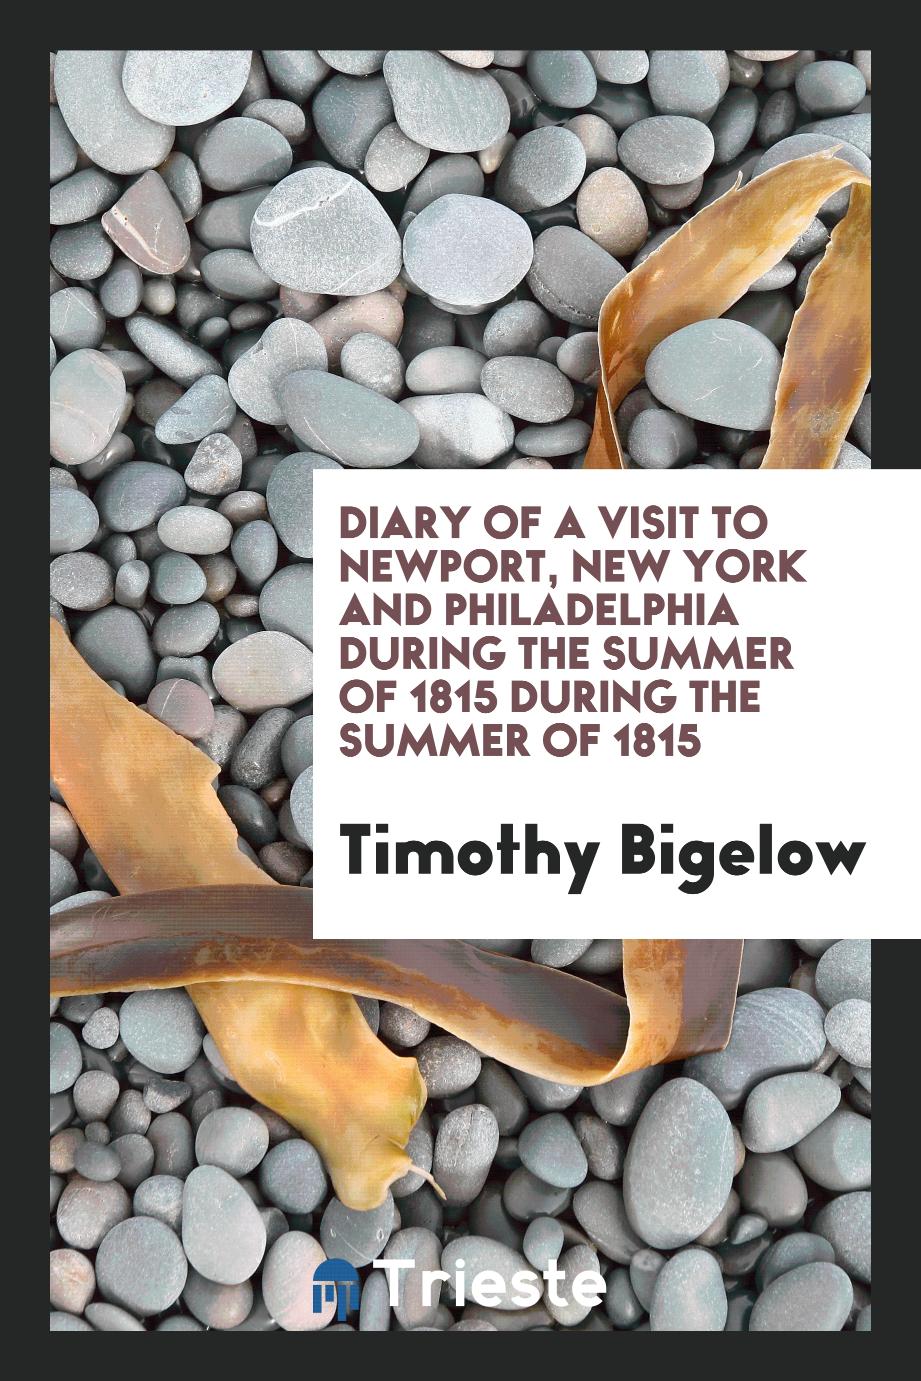 Diary of a Visit to Newport, New York and Philadelphia During the Summer of 1815 during the summer of 1815